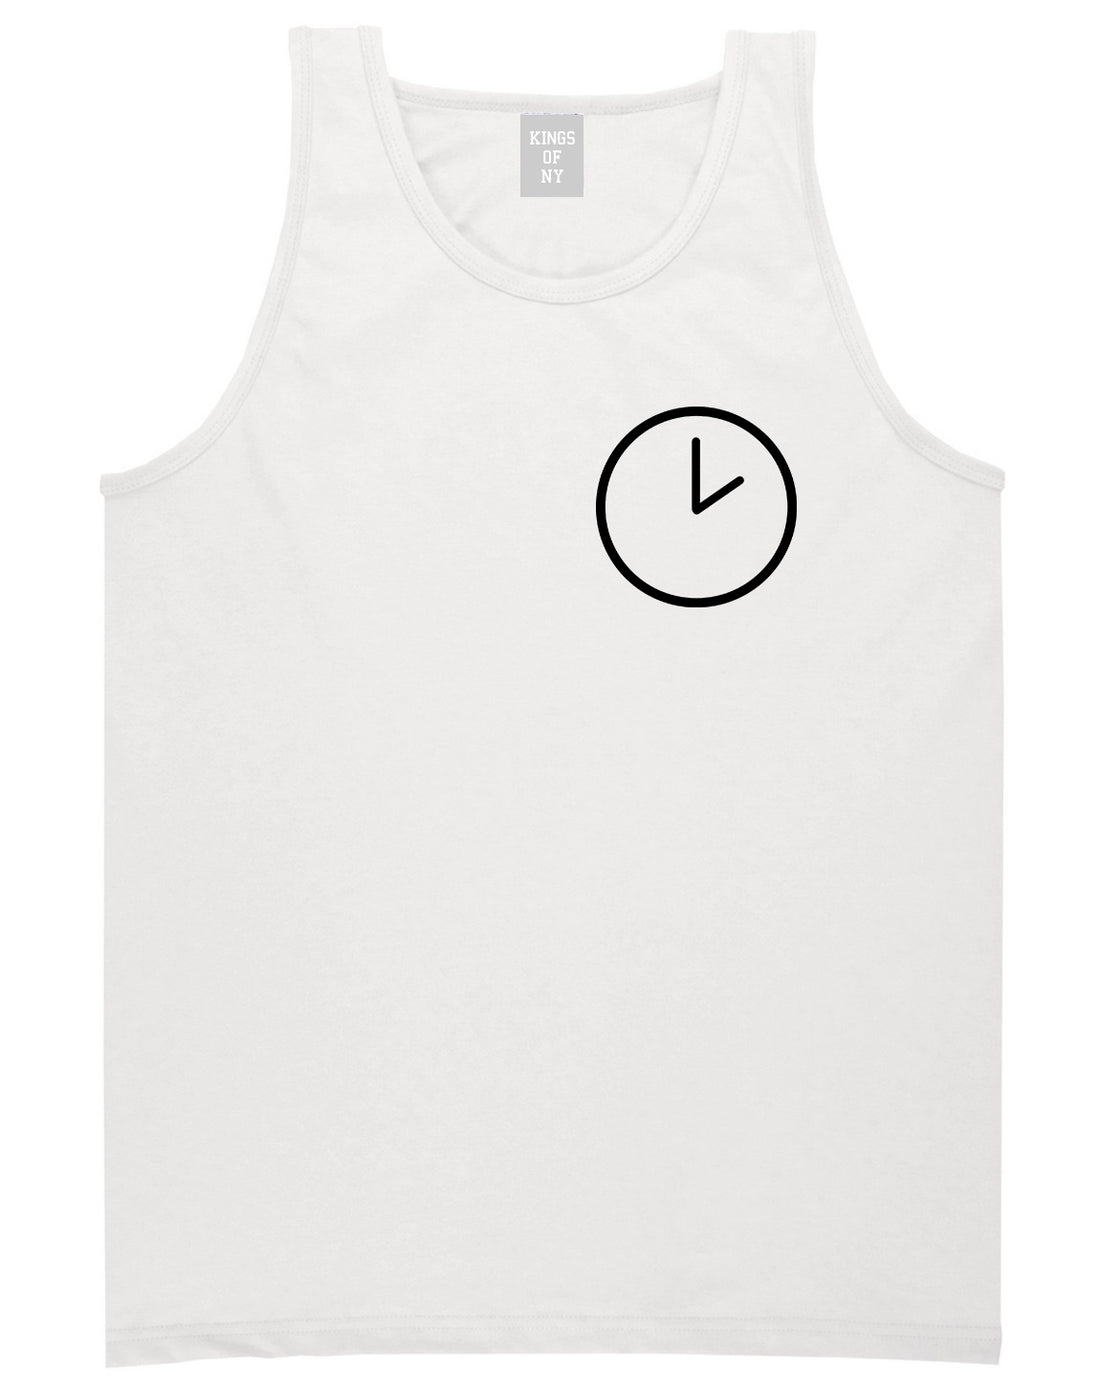 Clock Chest White Tank Top Shirt by Kings Of NY